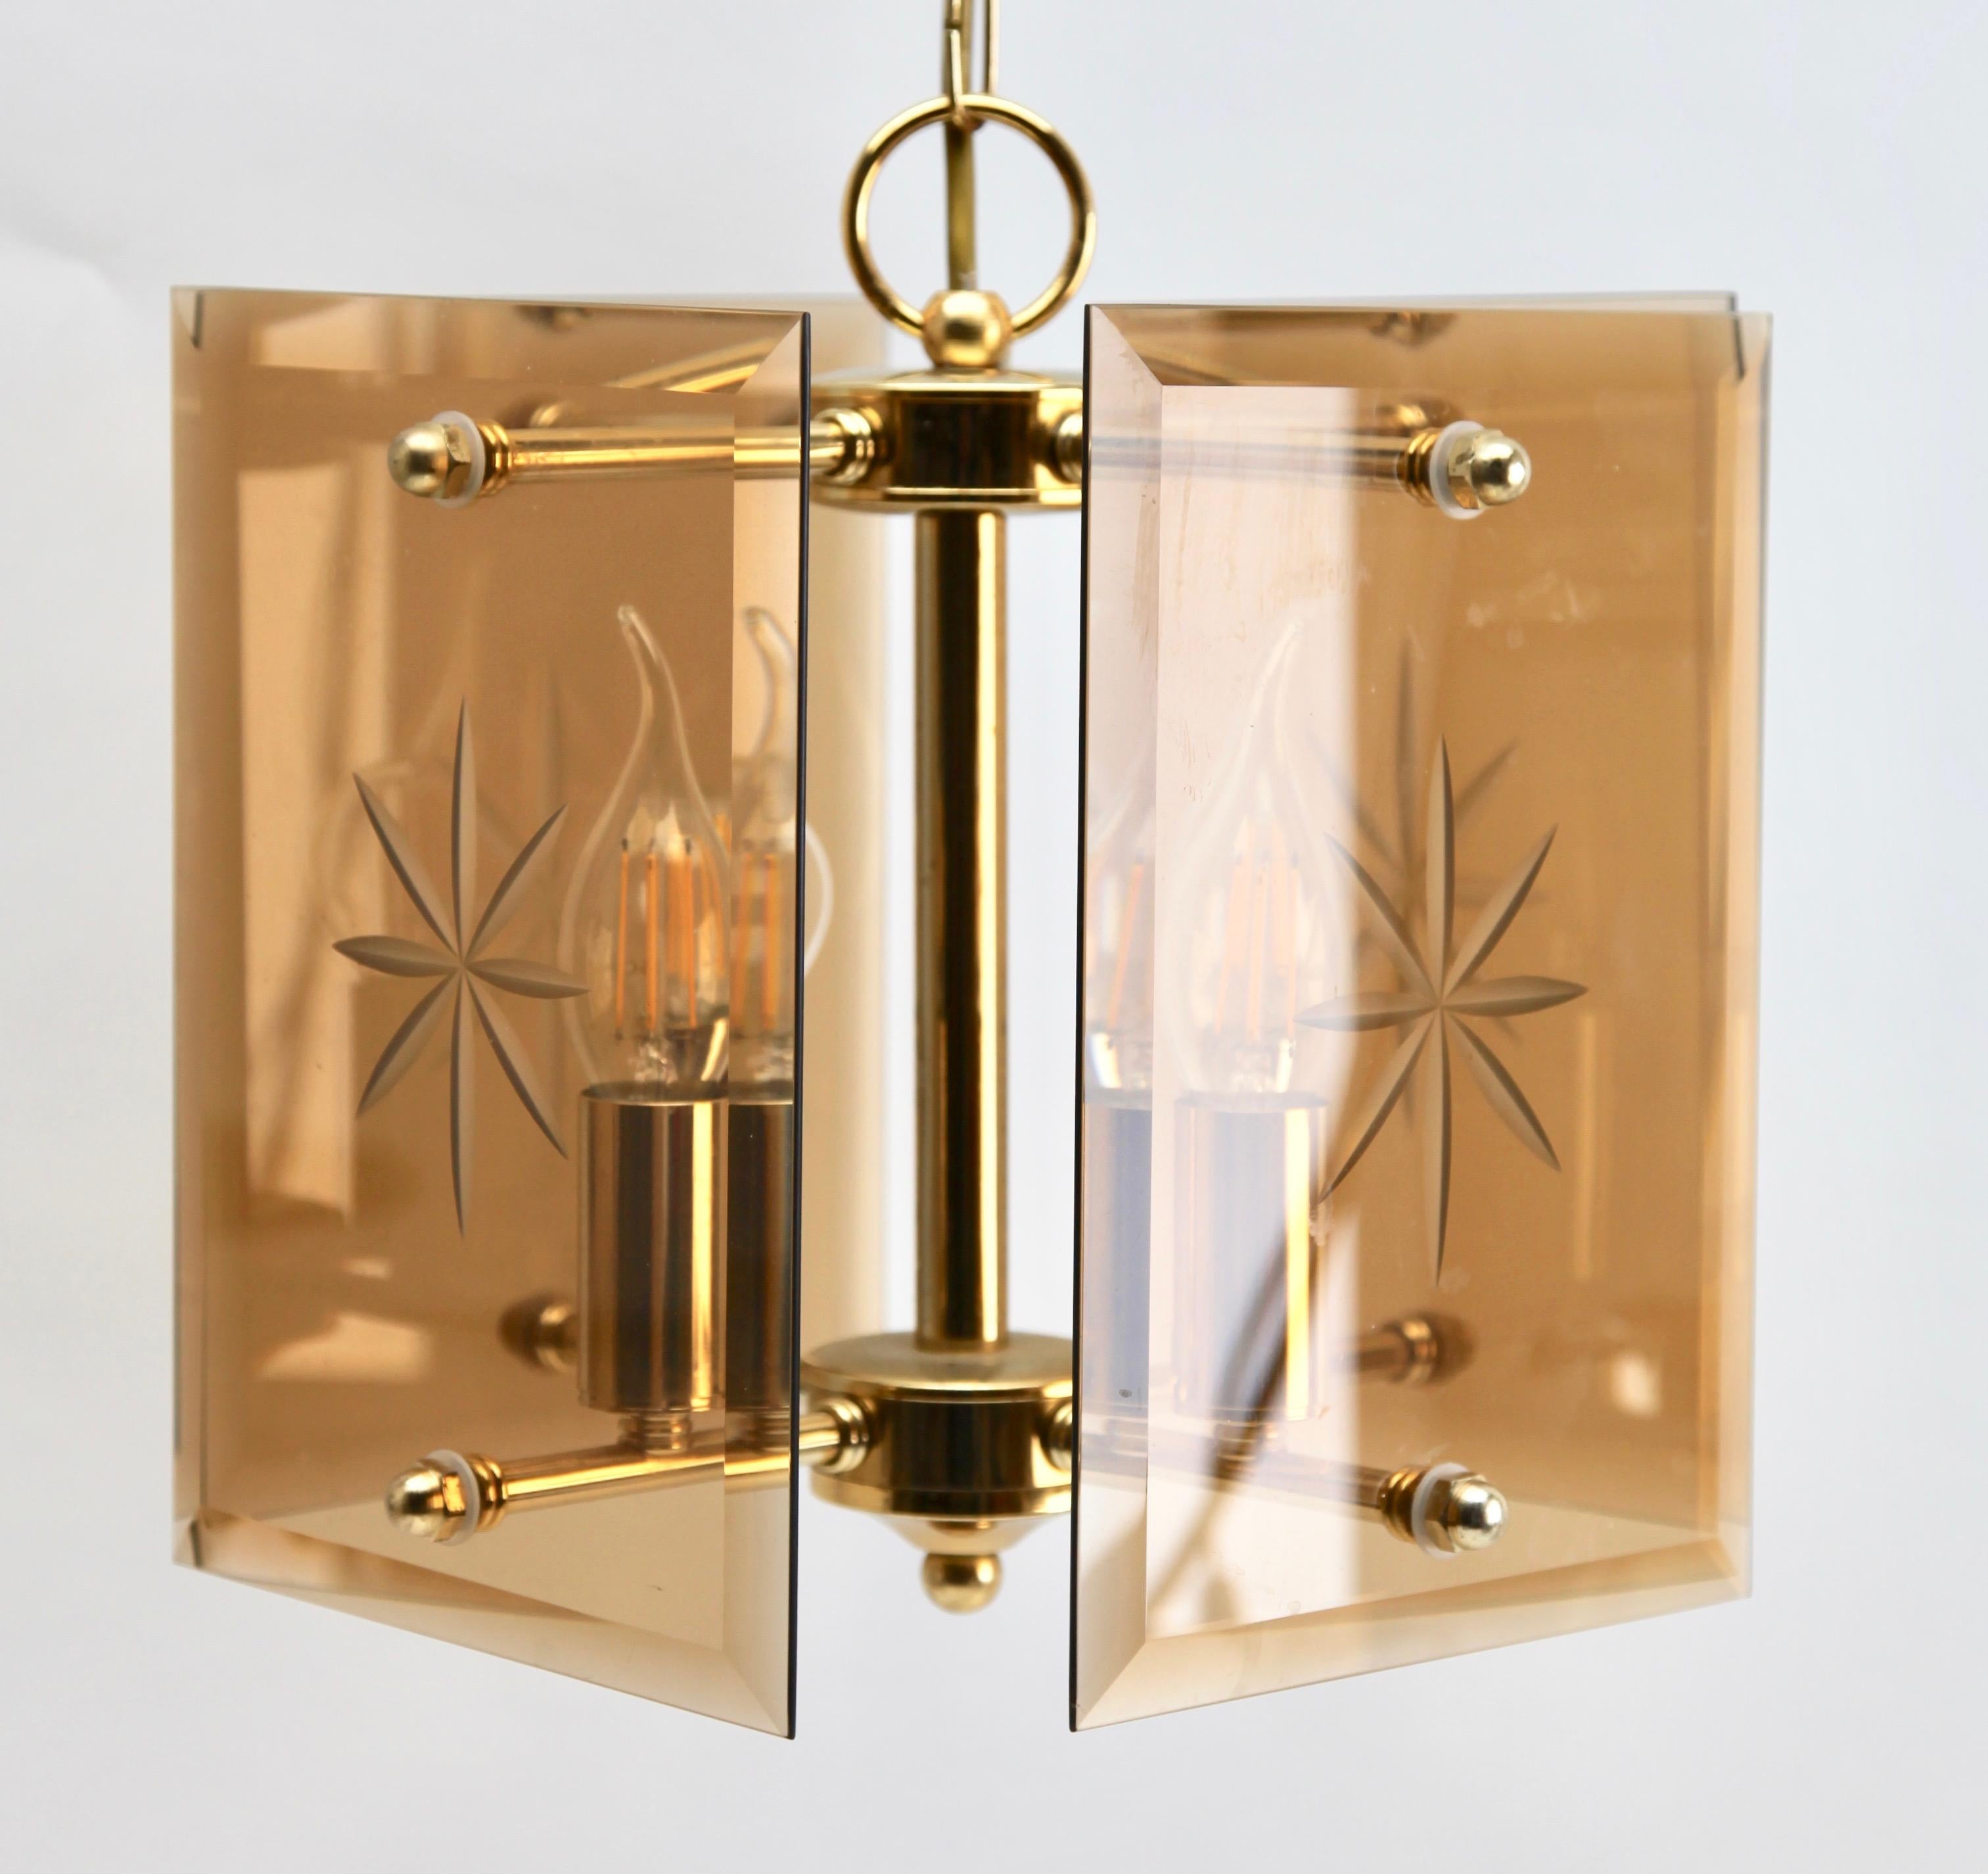 Geometric modernist design on a brass-patinated stem. Central chain and column with four pairs of arms supporting four lamps in candlestick form, and four bronze colored glass sheets acting as shades, each with an engraved star motif.
This simple